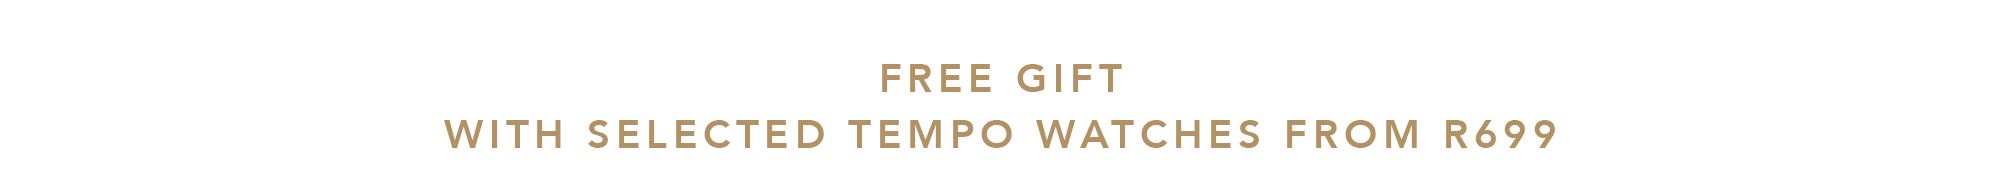 FREE GIFT WITH SELECTED TEMPO WATCHES FROM R699